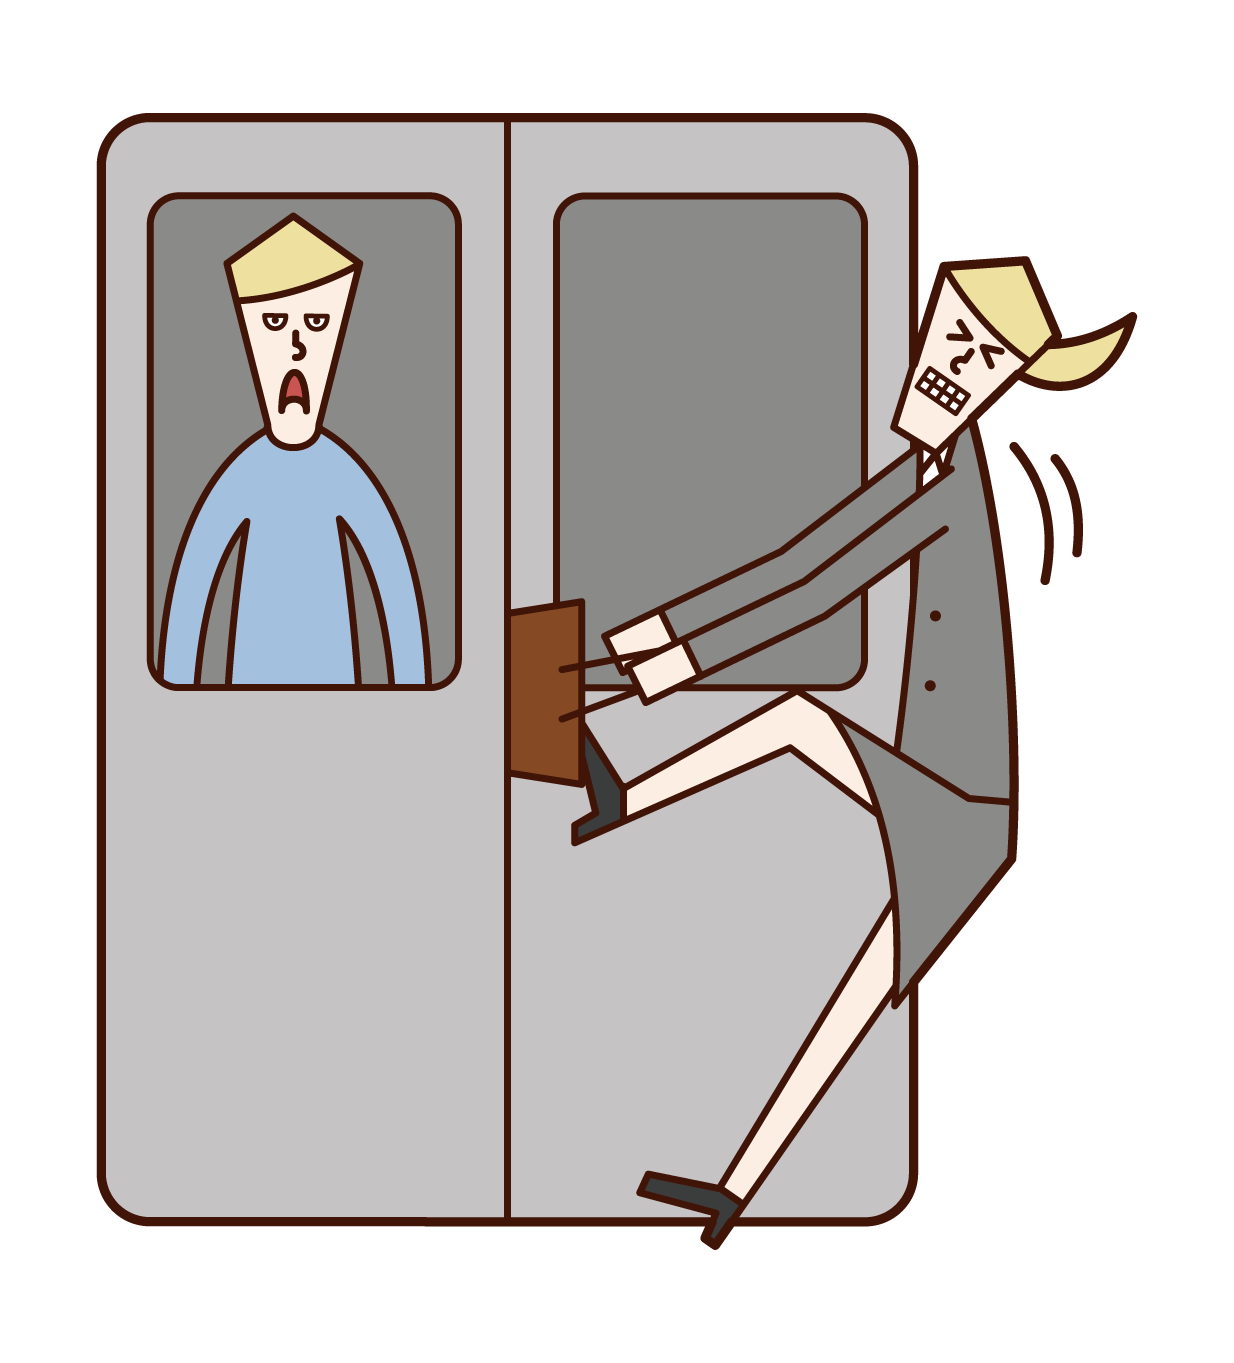 Illustration of a woman with luggage stuck in a train door